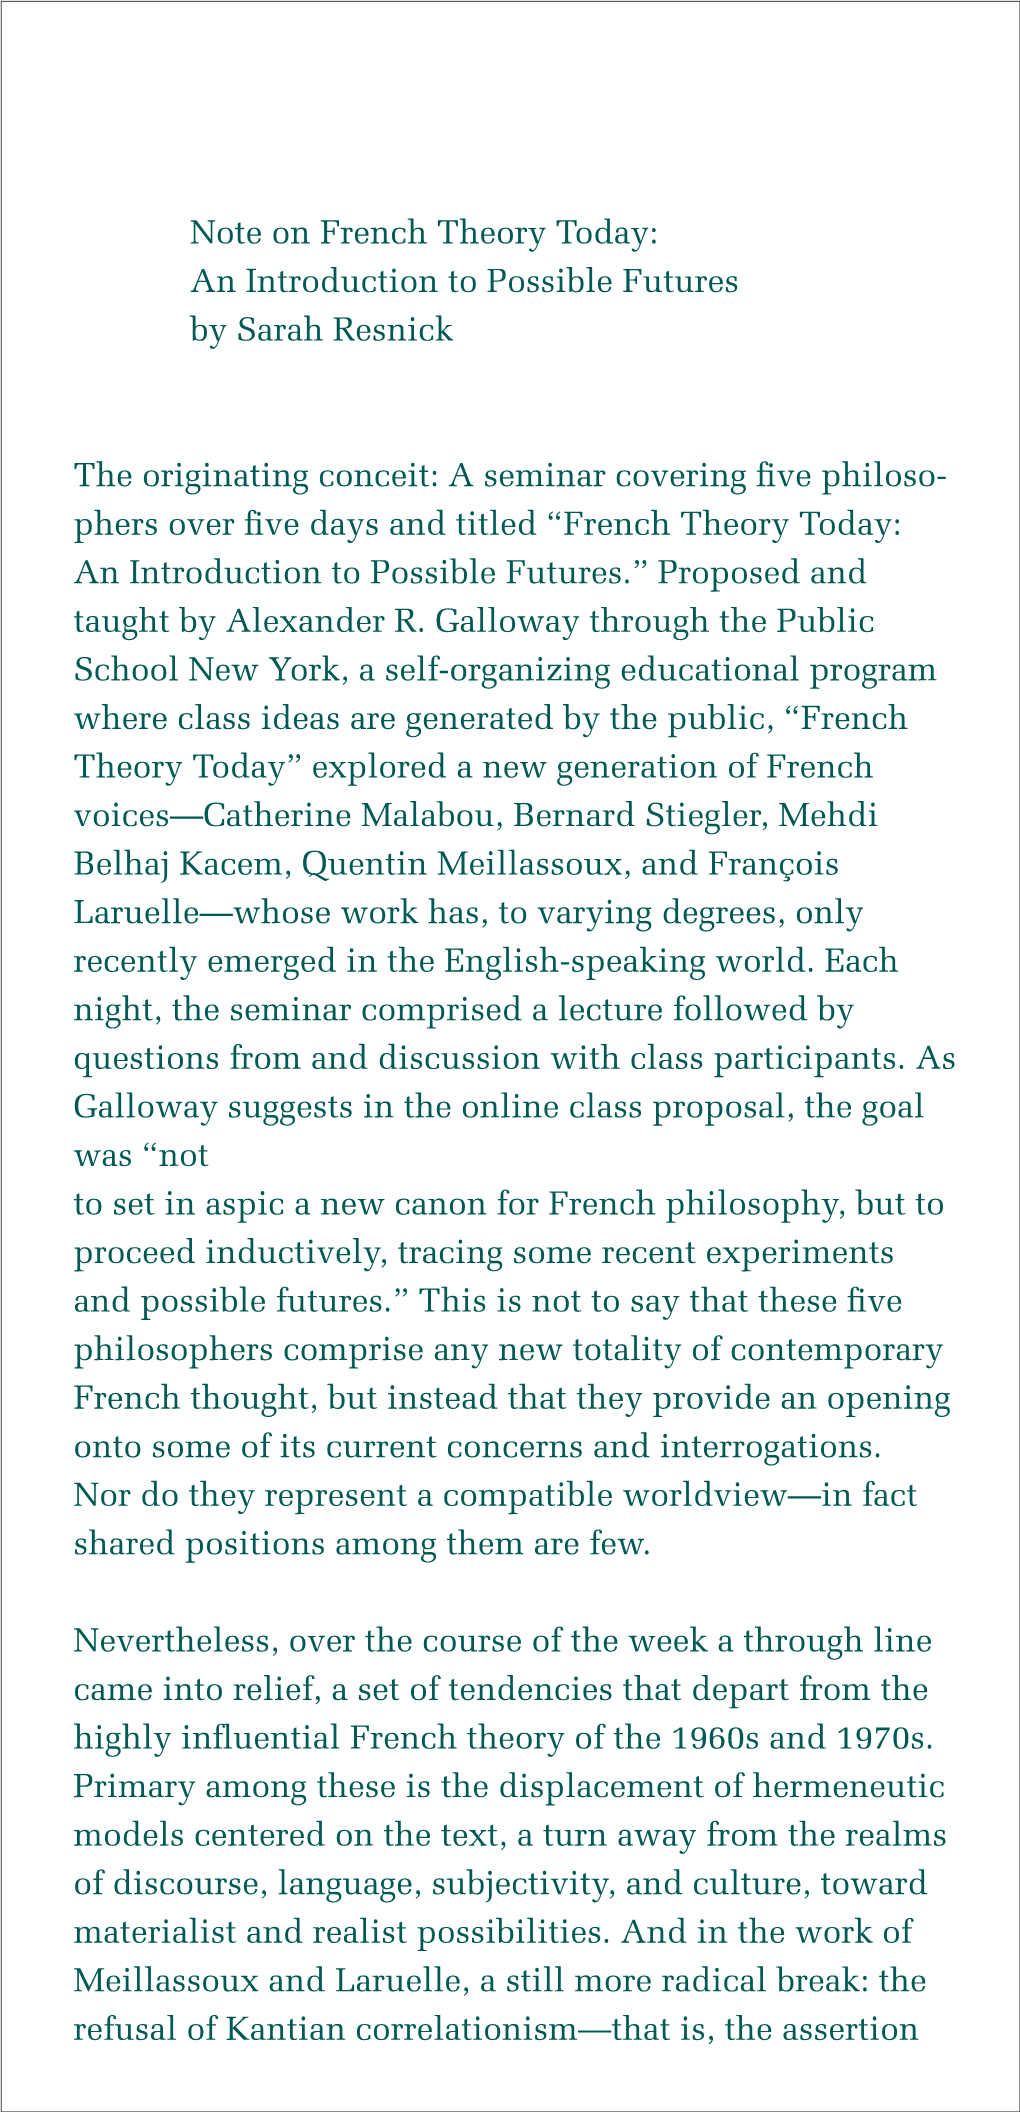 Note on French Theory Today: an Introduction to Possible Futures by Sarah Resnick